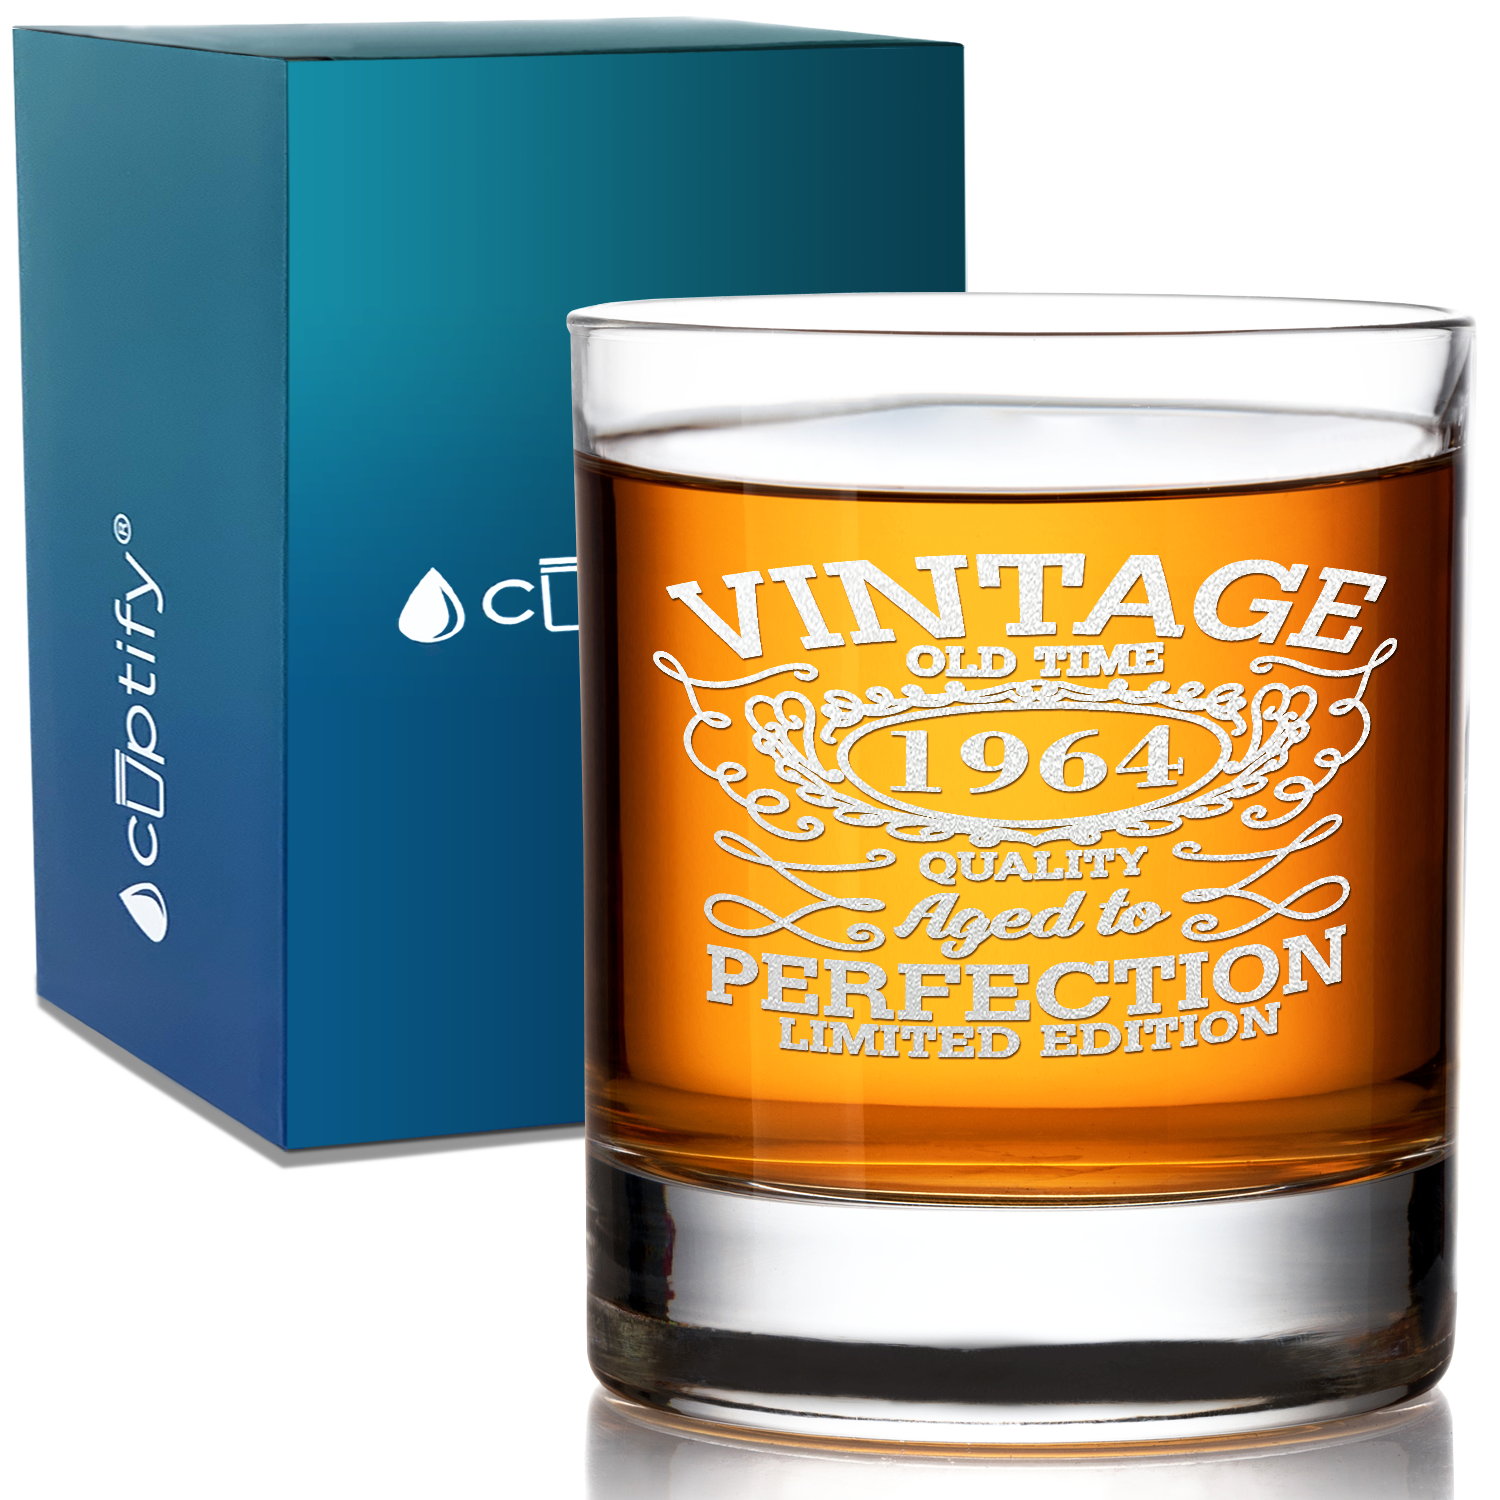 57th Birthday Vintage 57 Years Old Time 1964 Quality Laser Engraved 10.25oz Old Fashion Glass